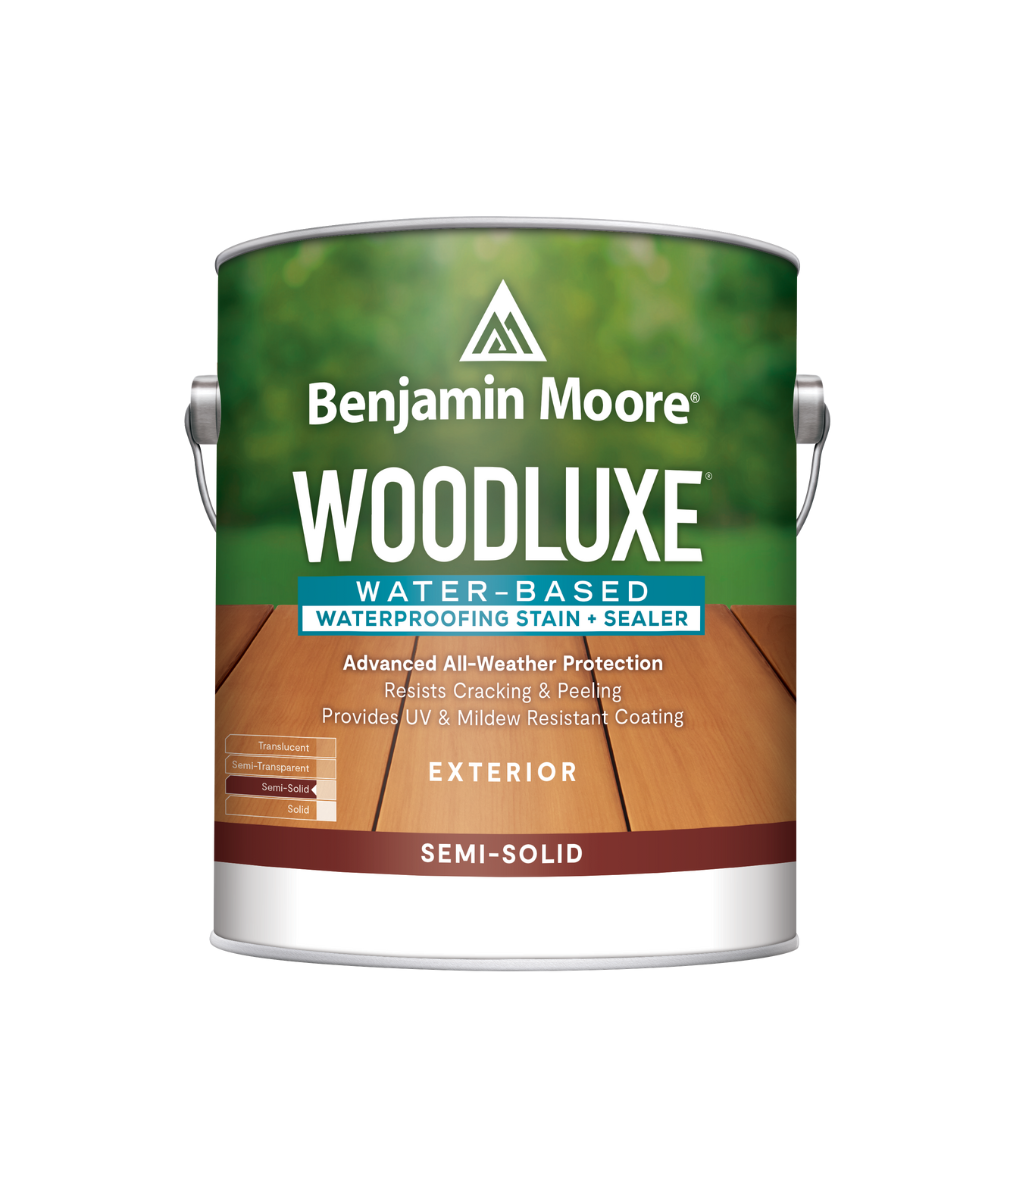 Benjamin Moore Woodluxe® Water-Based Semi-Solid Exterior Stain available at JC Licht.